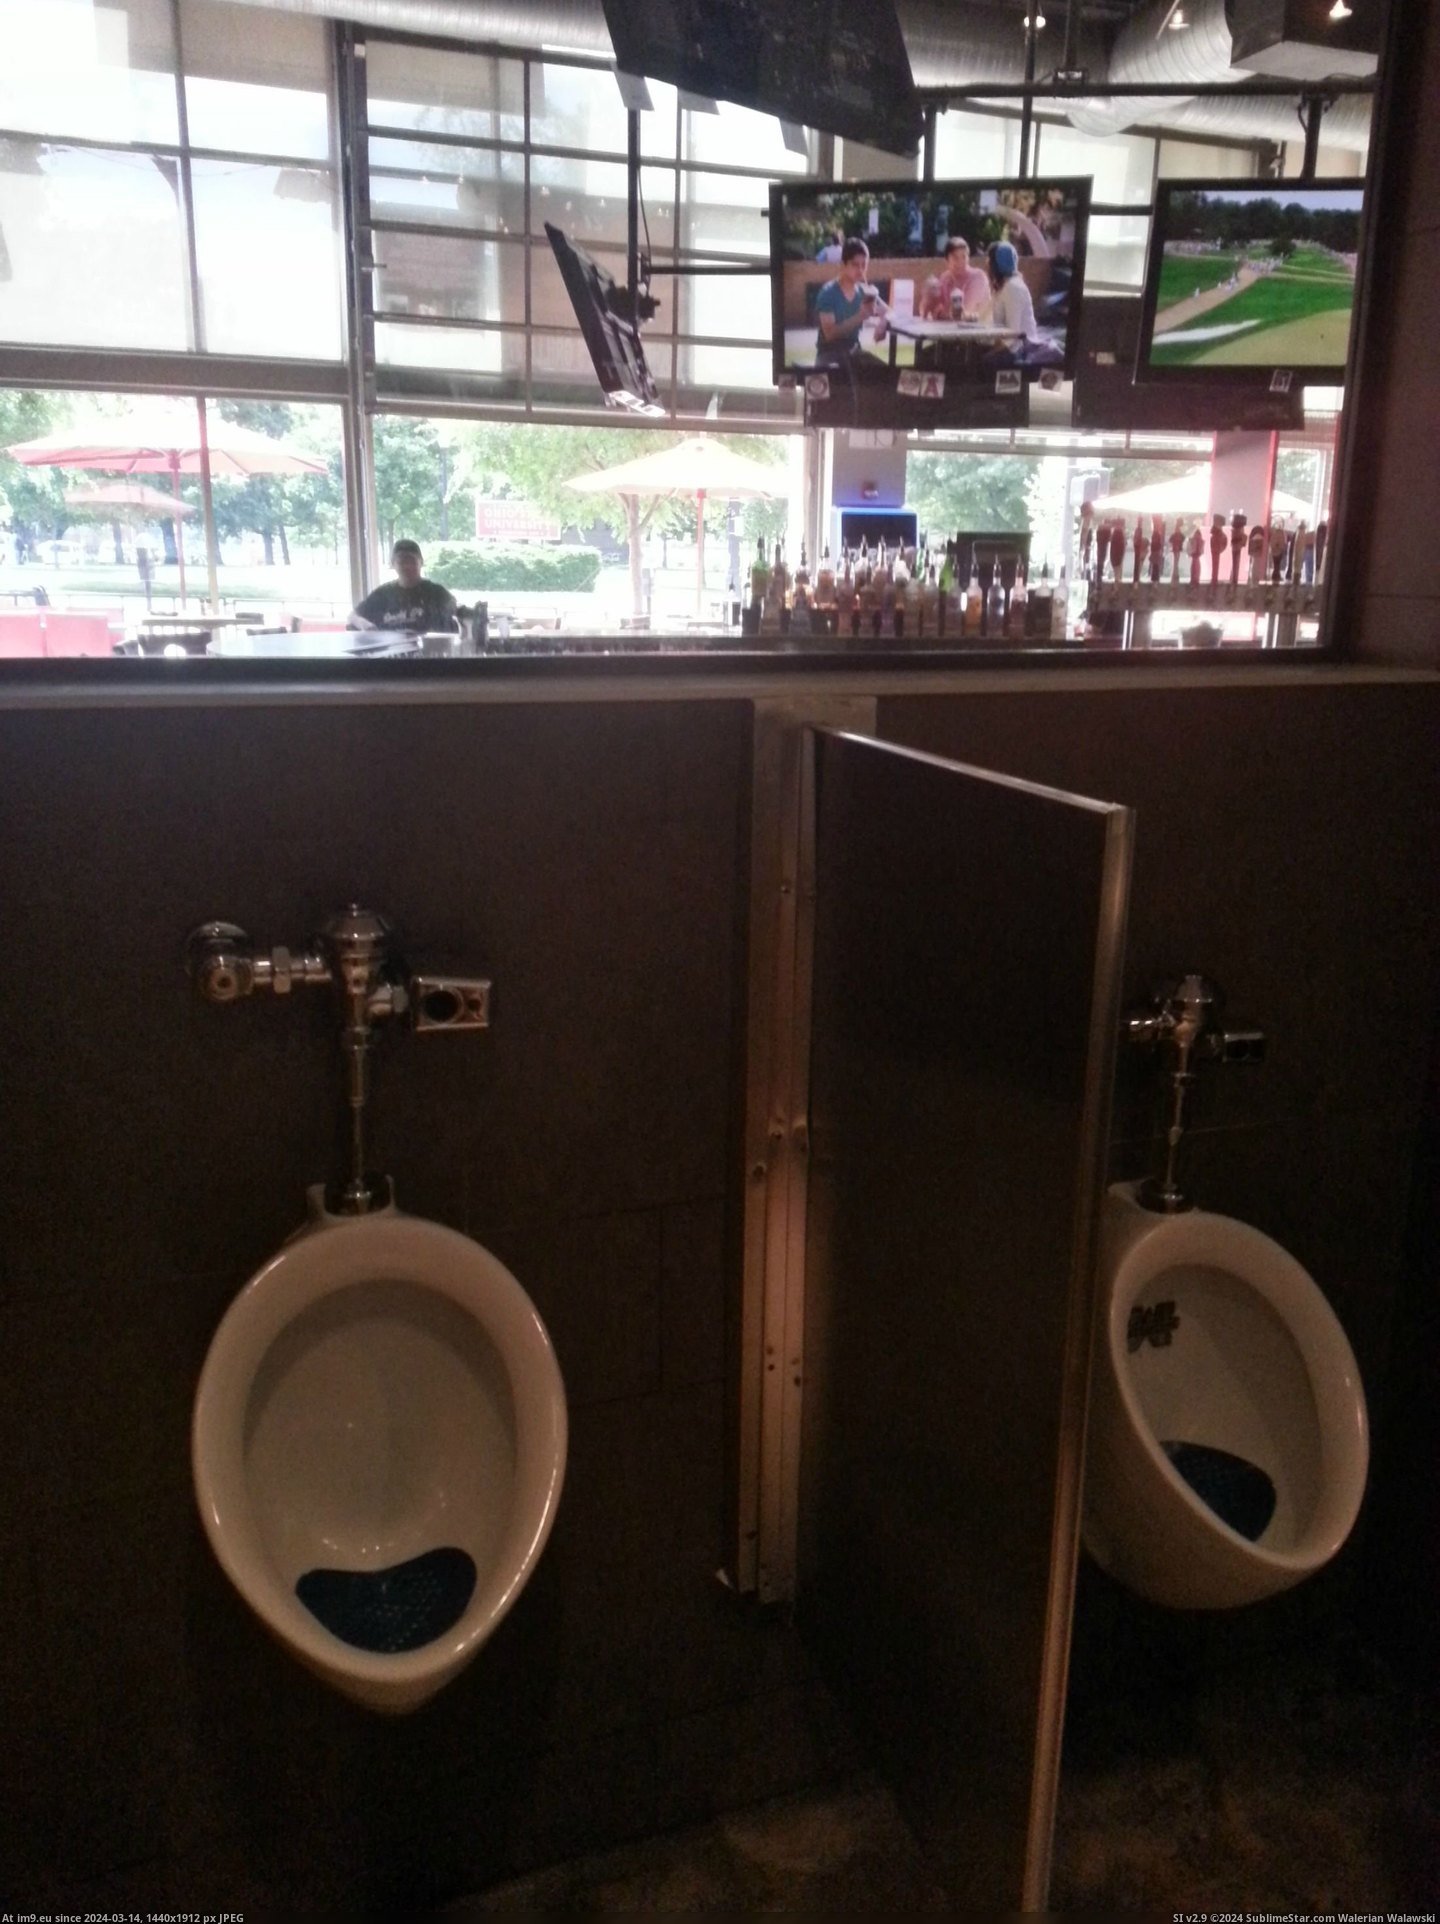 #One #You #Game #Bar #Sports #Bathrooms #Way #Glass #Any [Mildlyinteresting] This sports bar has one way glass in the bathrooms so you don't miss any of the game Pic. (Image of album My r/MILDLYINTERESTING favs))